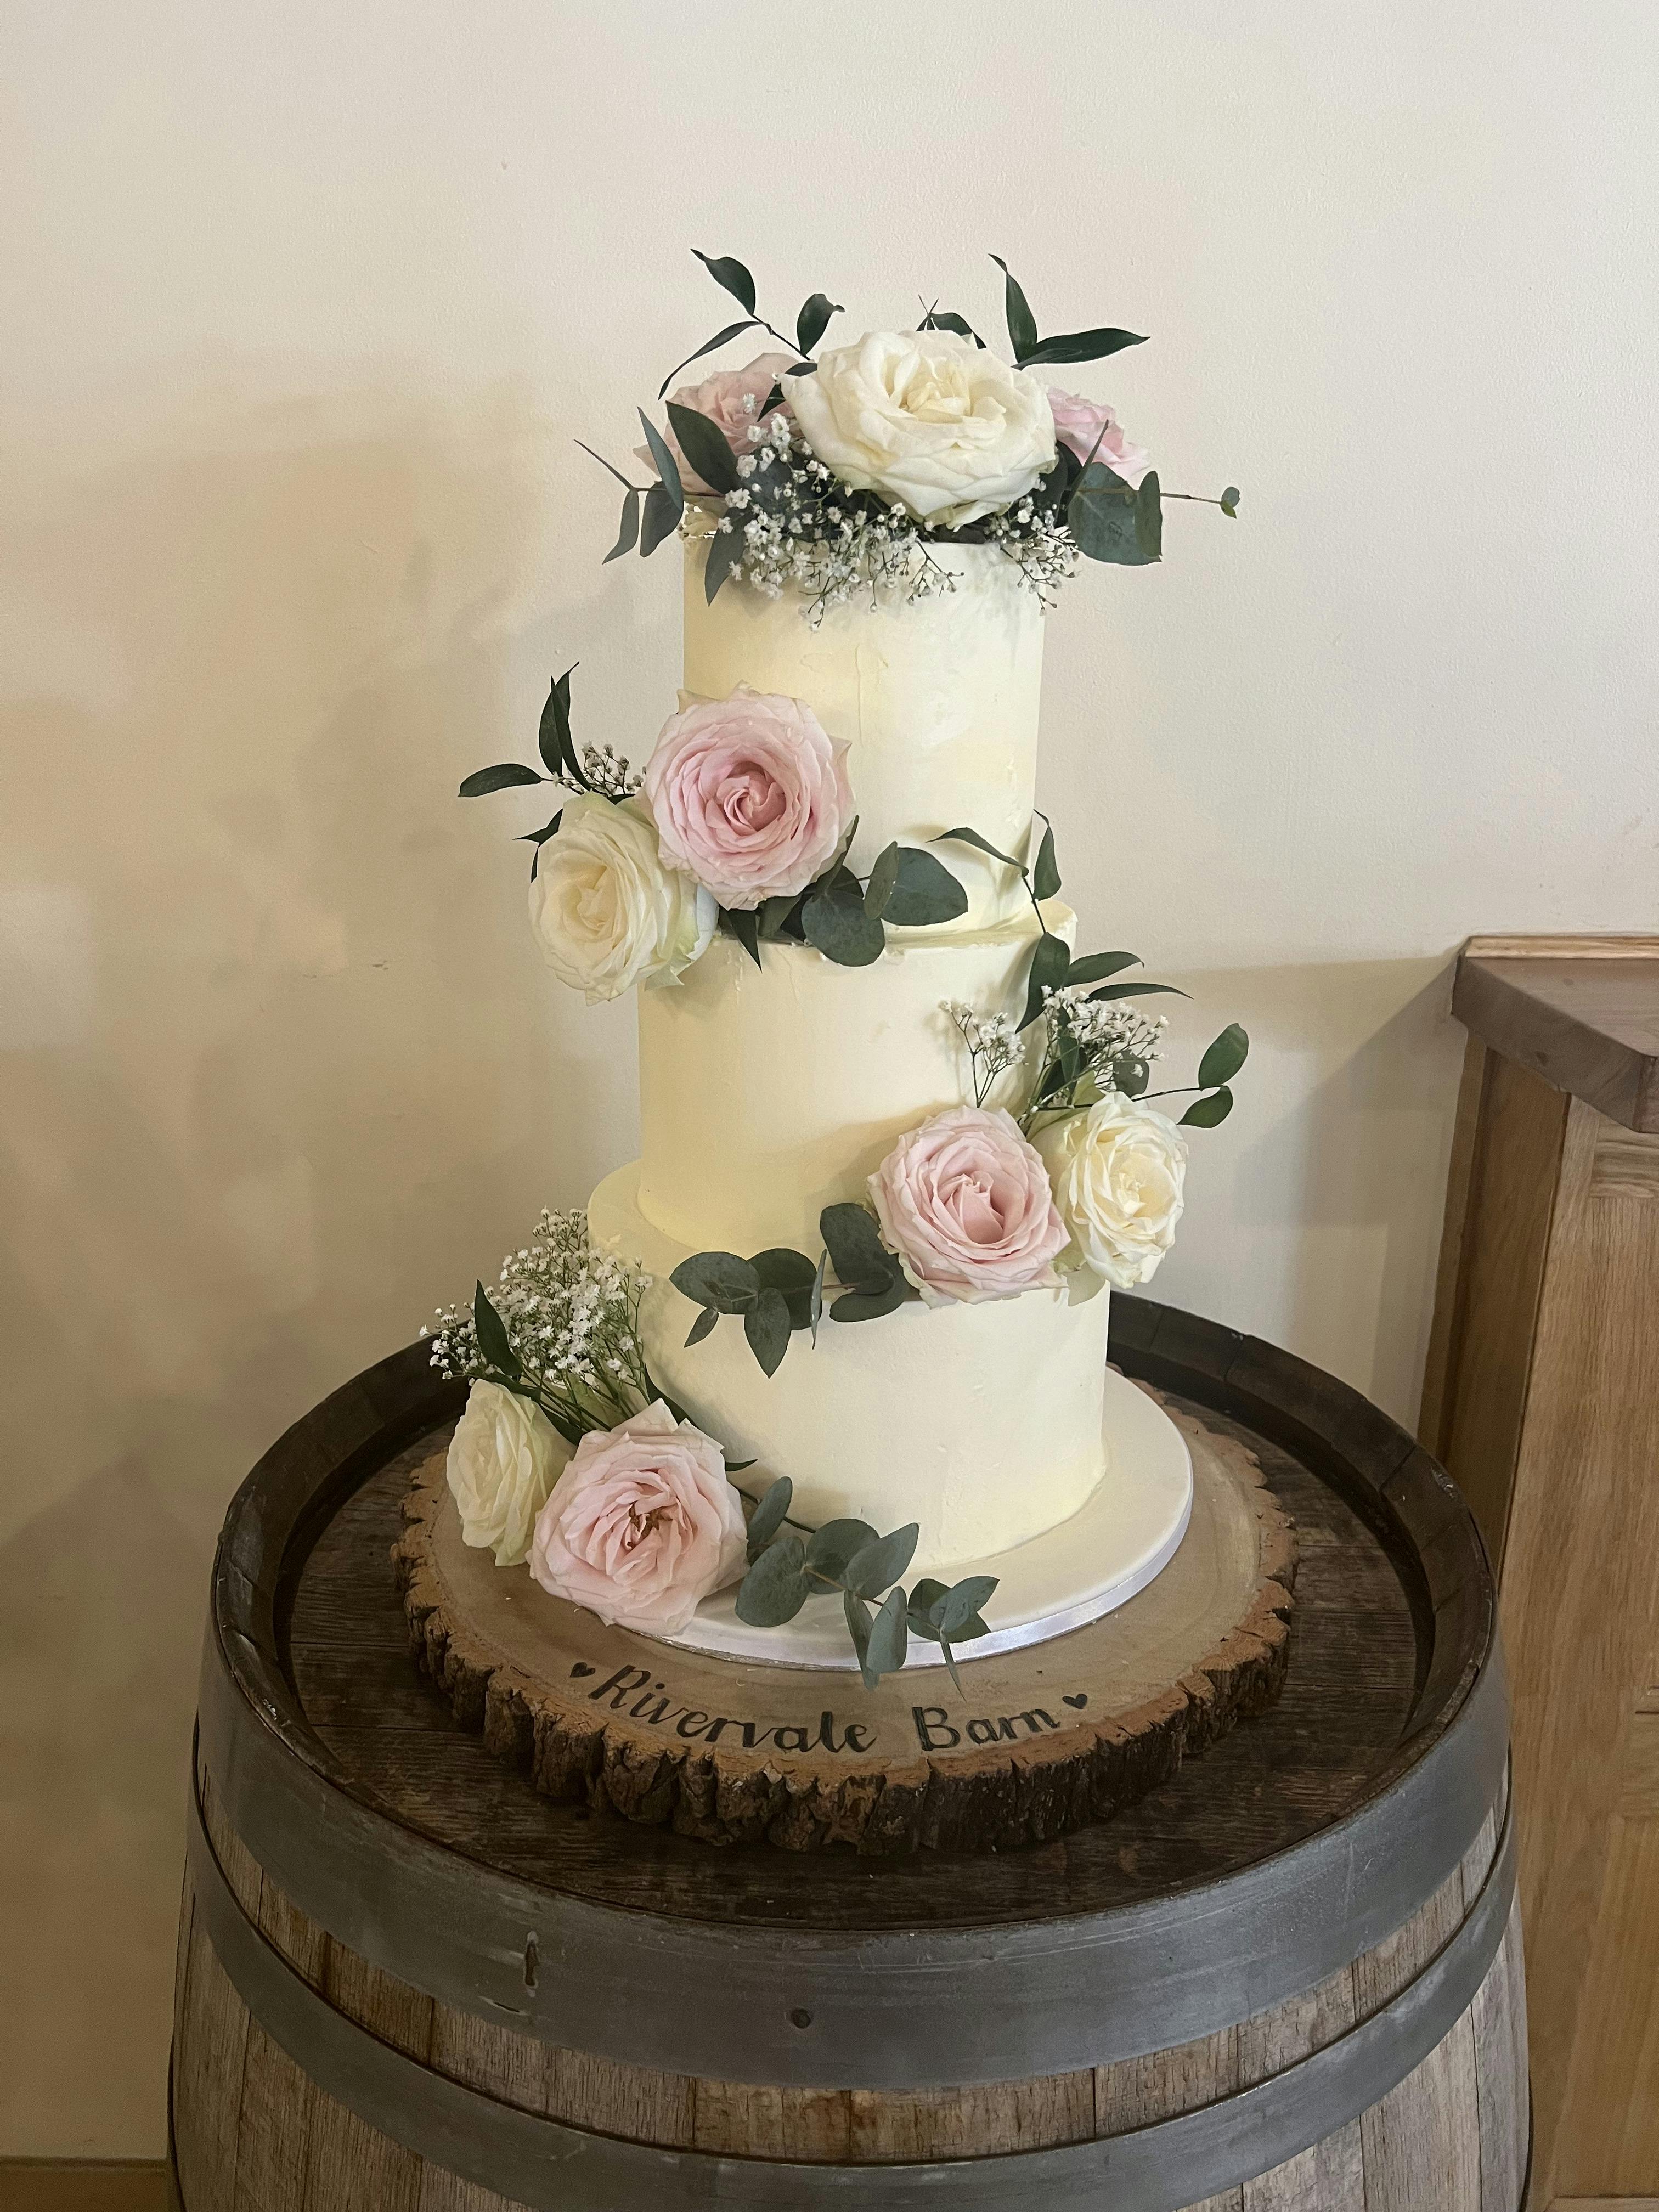 White wedding cake with leaves and flowers on top of a wooden barrel